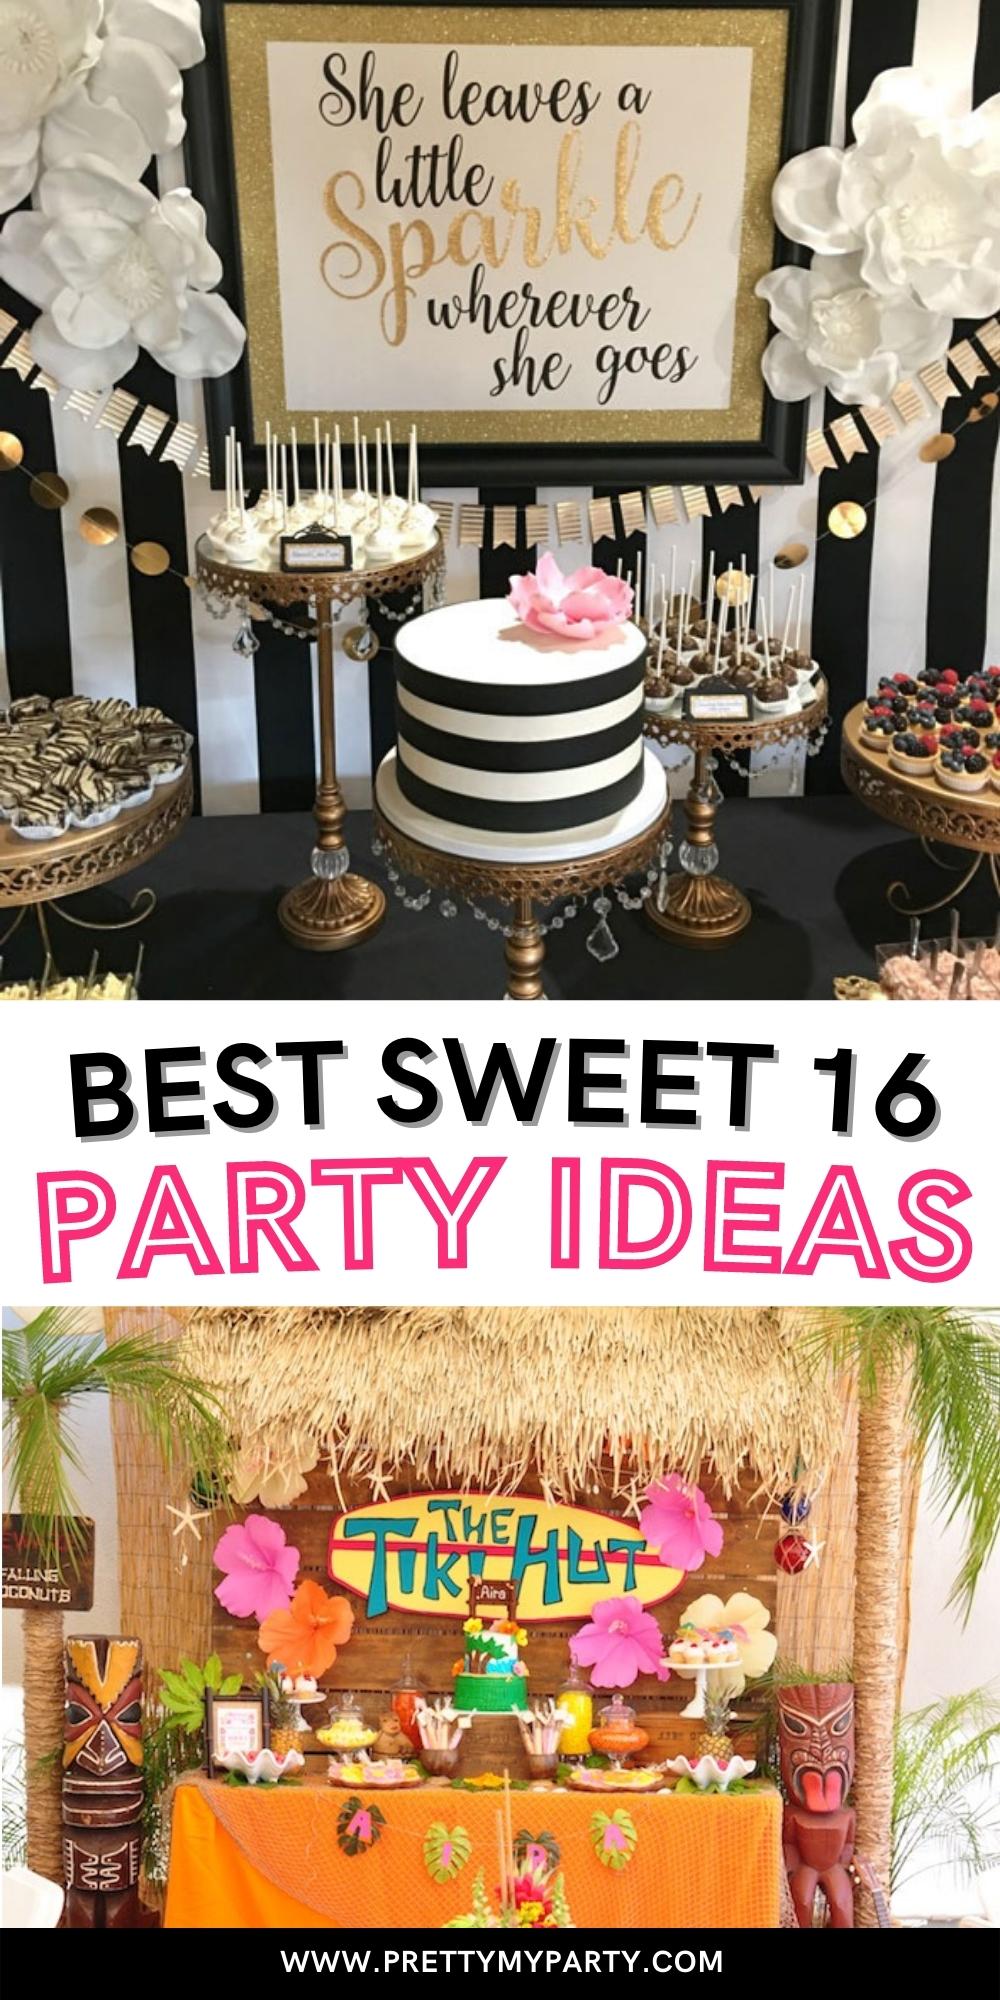 Best Sweet 16 Party Ideas and Themes on Pretty My Party